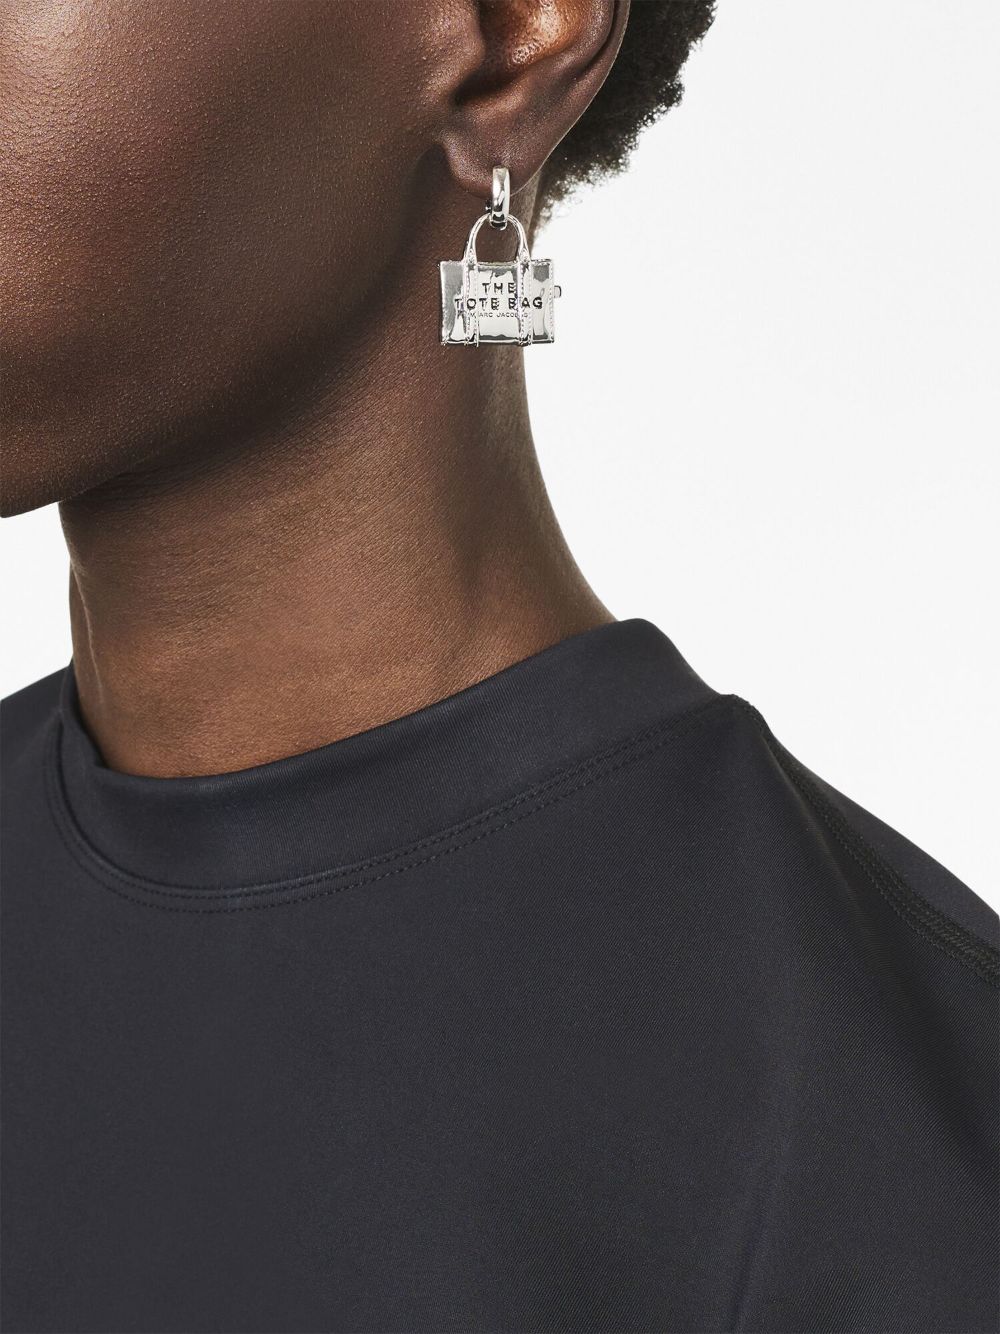 Marc Jacobs The Tote Bag earrings - Zilver